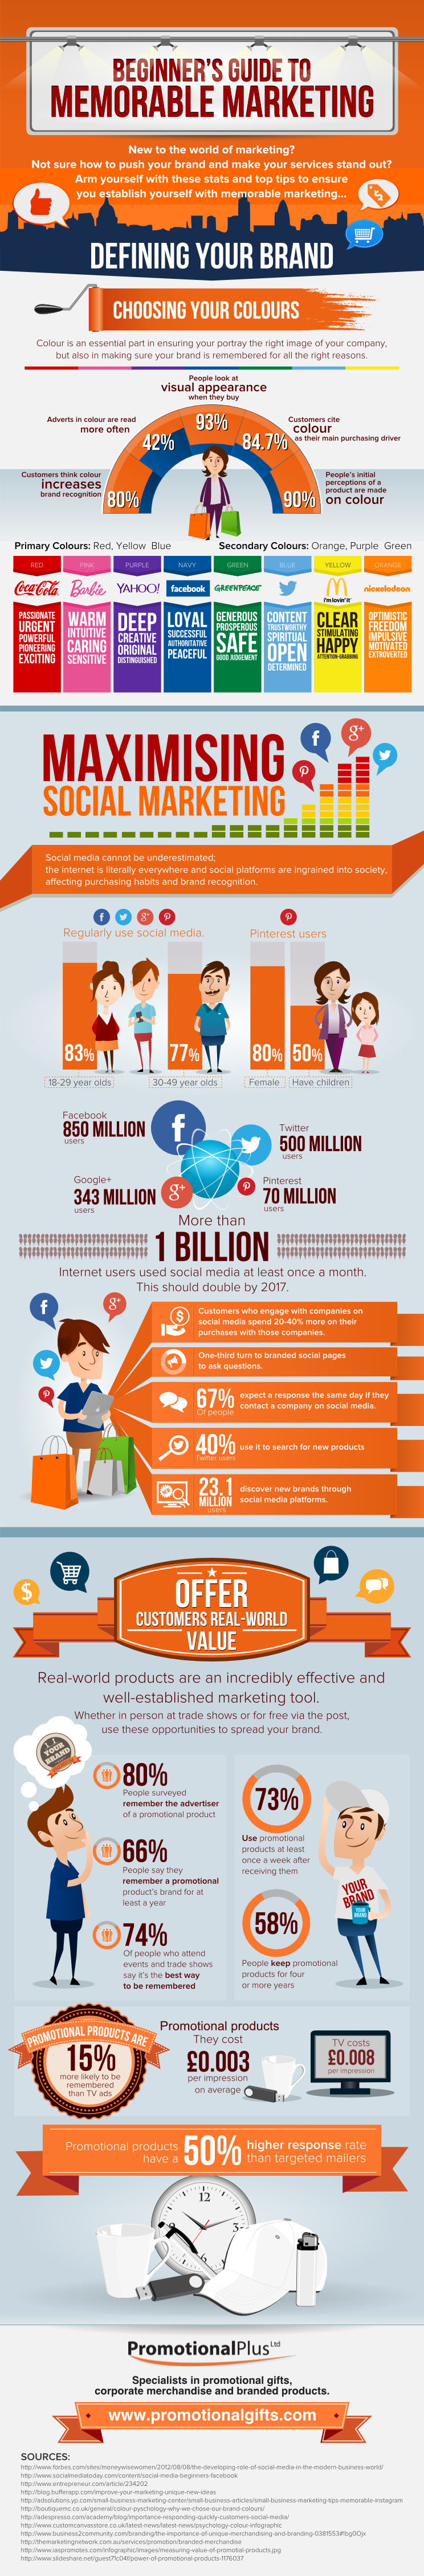 Memorable marketing guide infographic